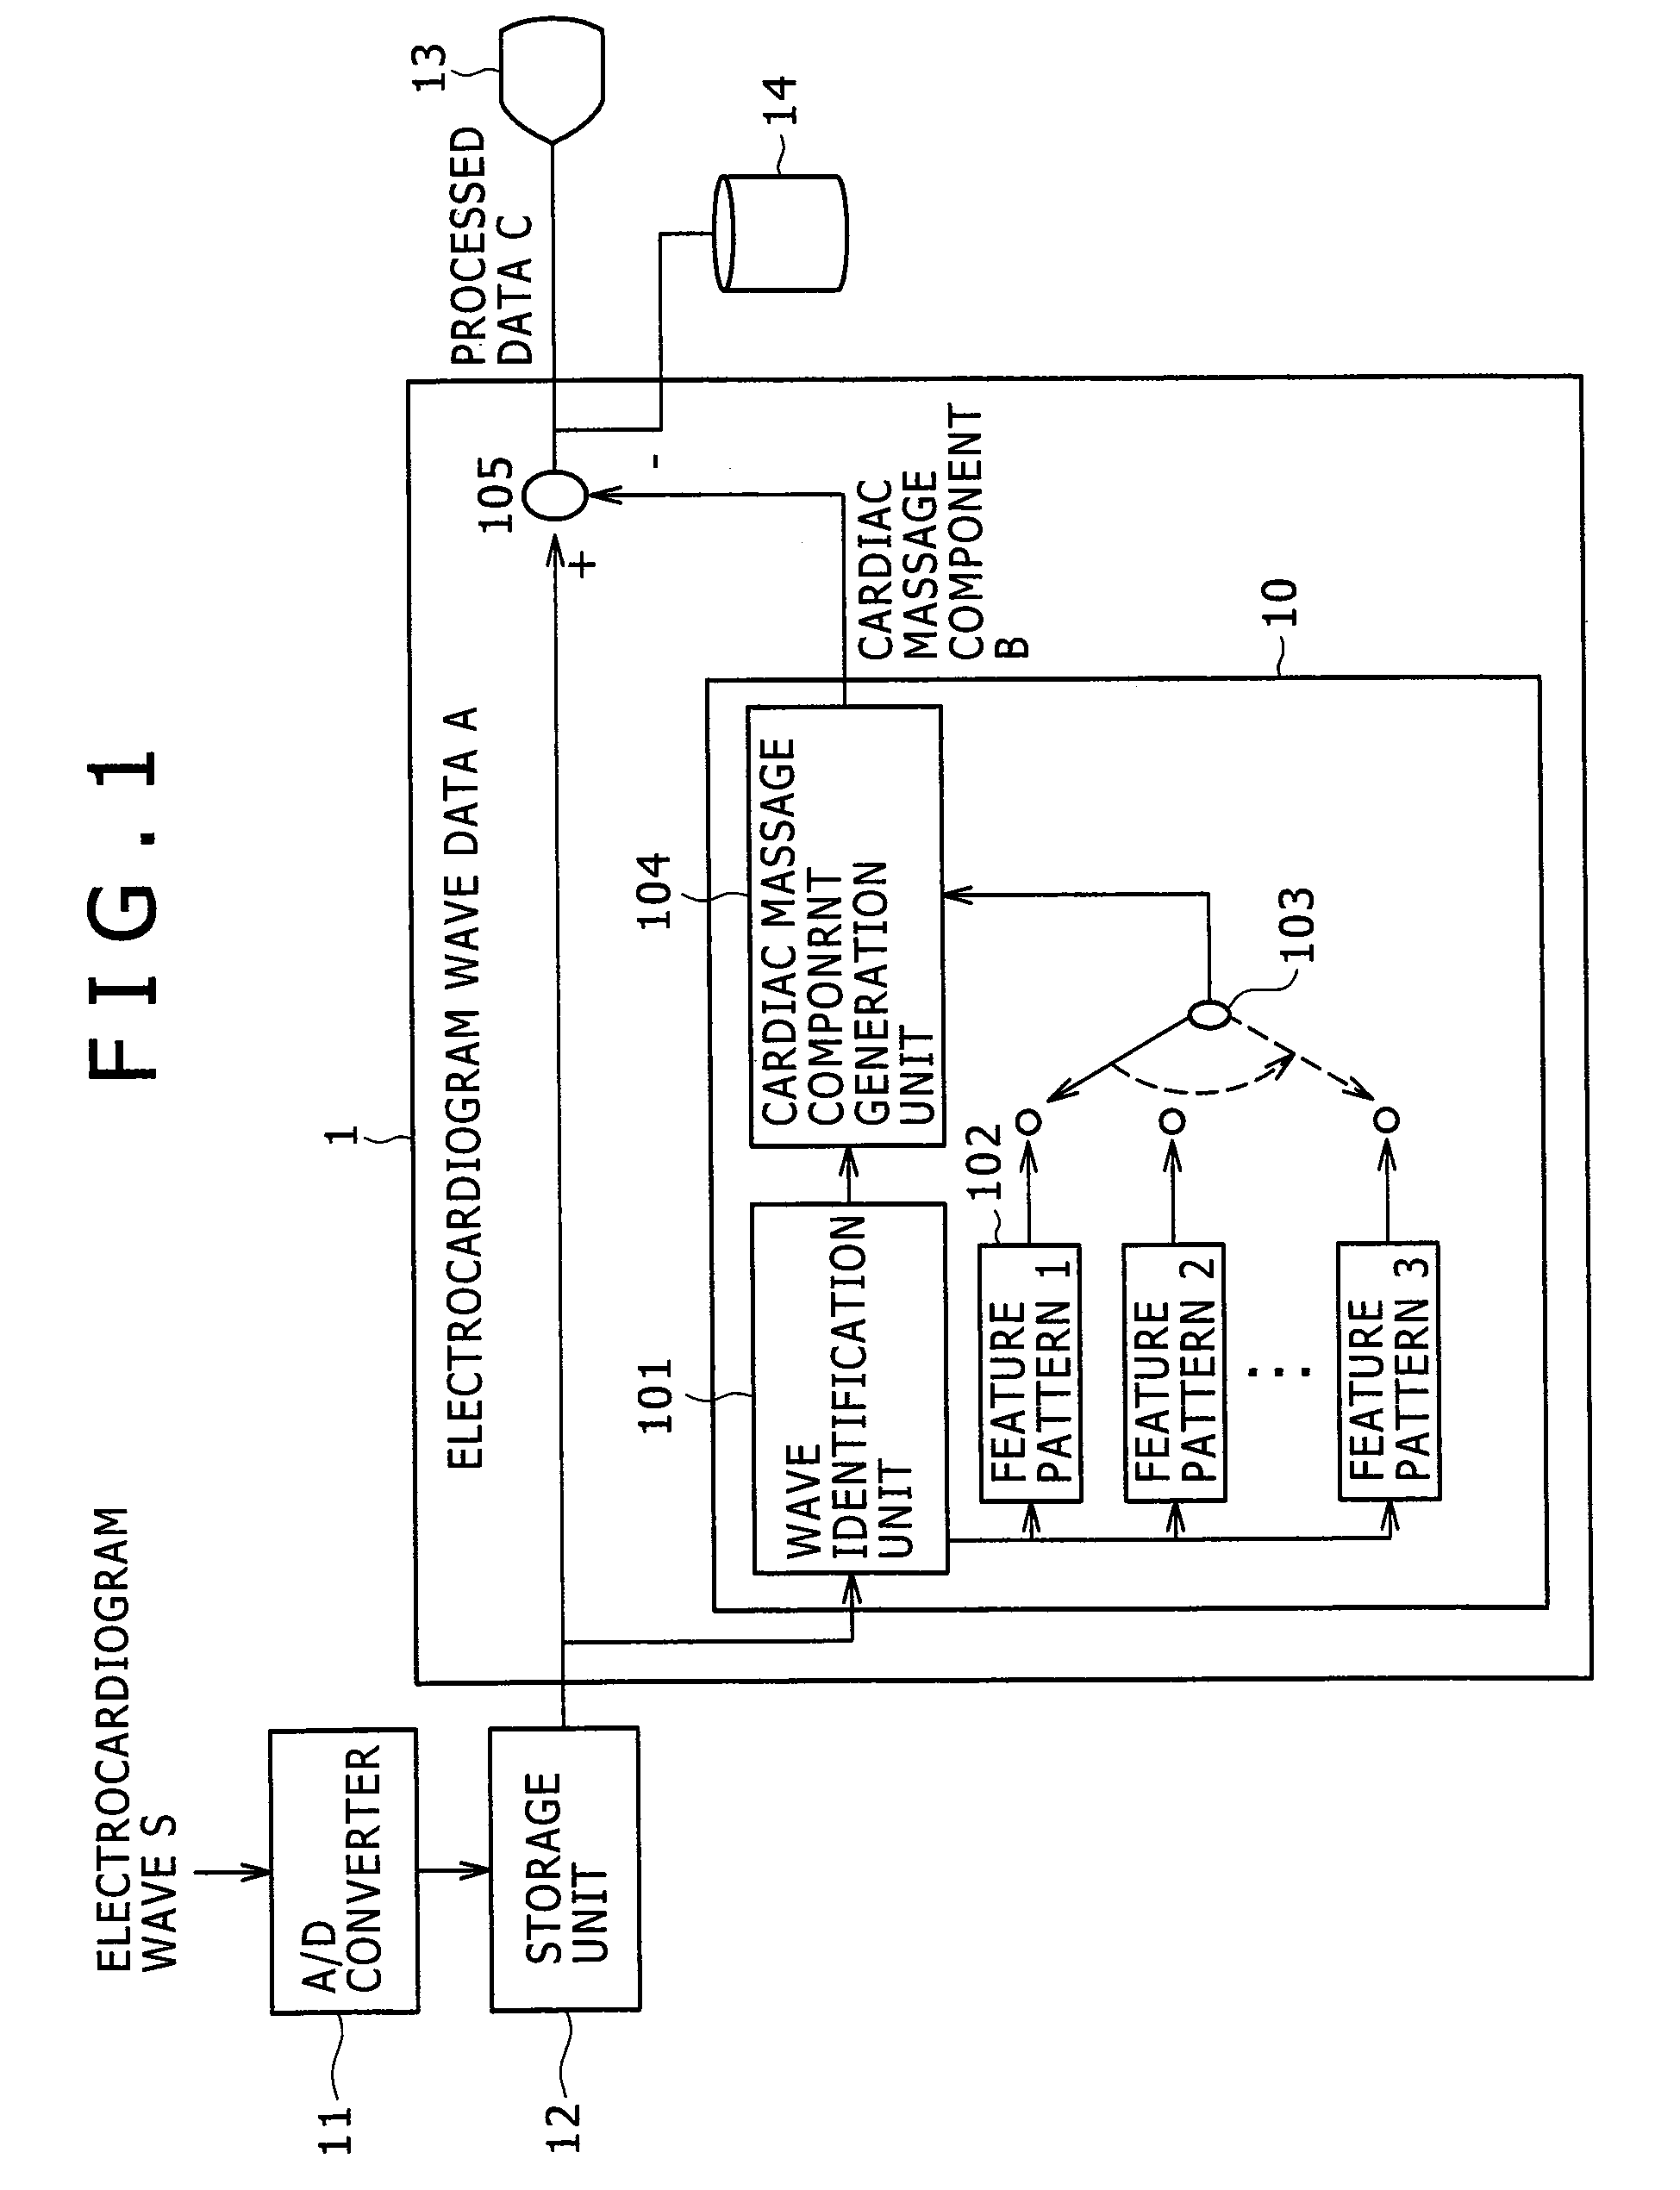 System and method for analyzing waves of electrocardiogram during CPR